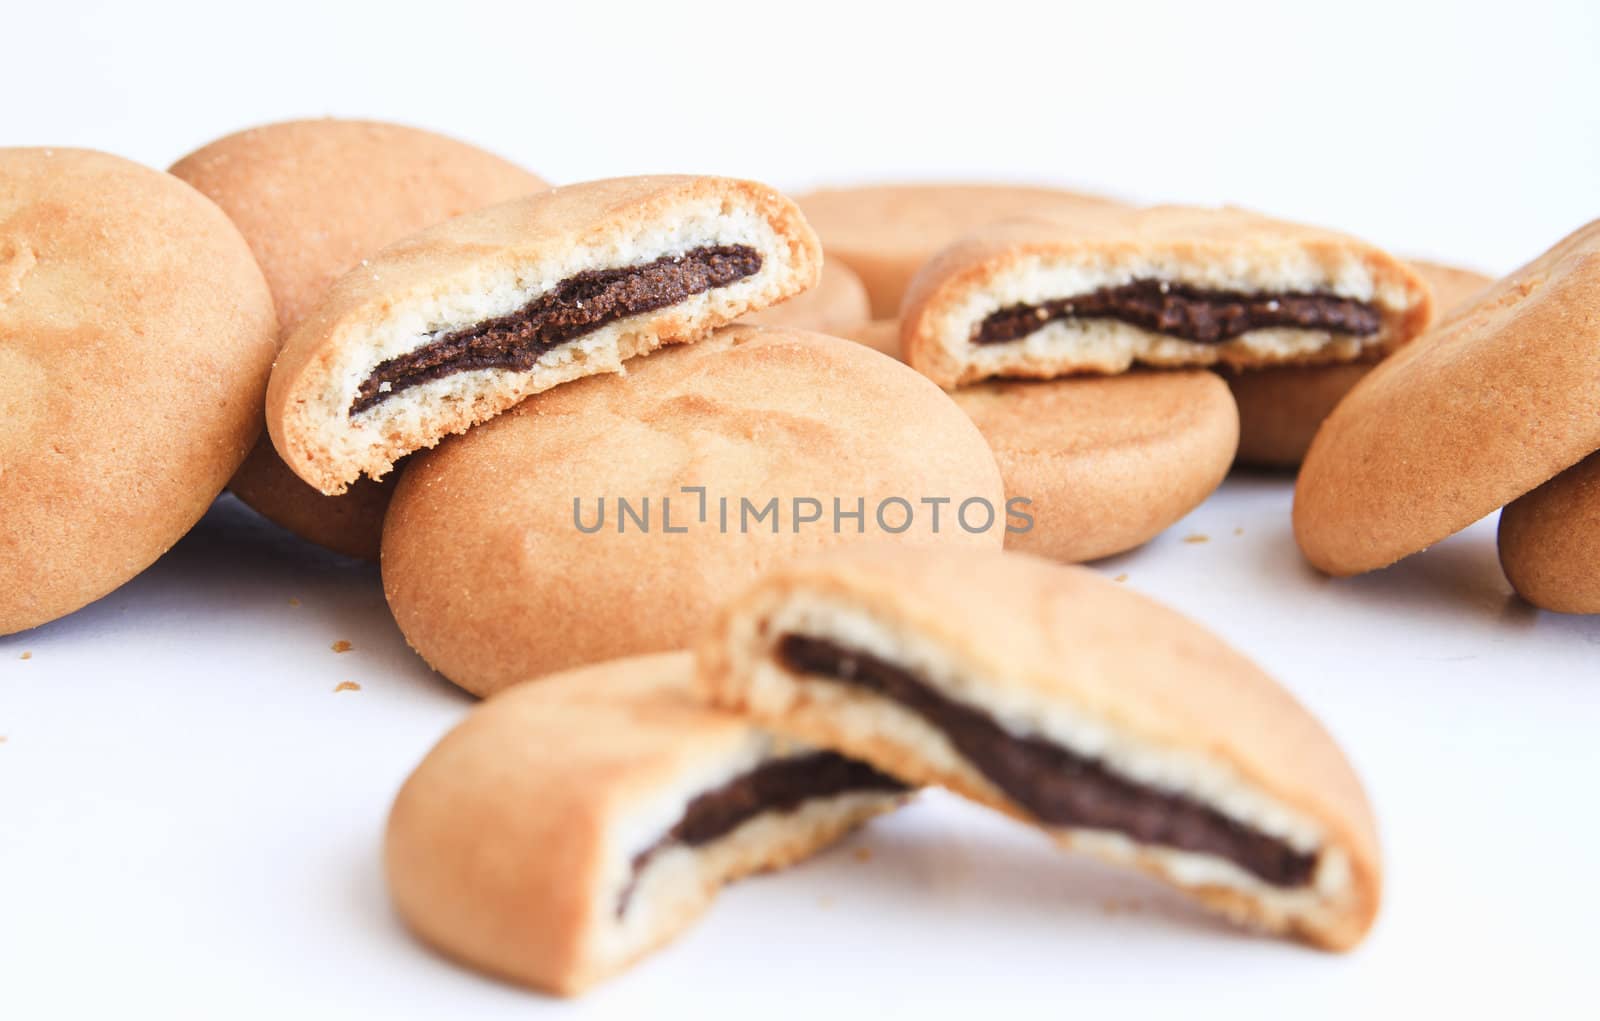 biscuits filled with chocolate isolated on white